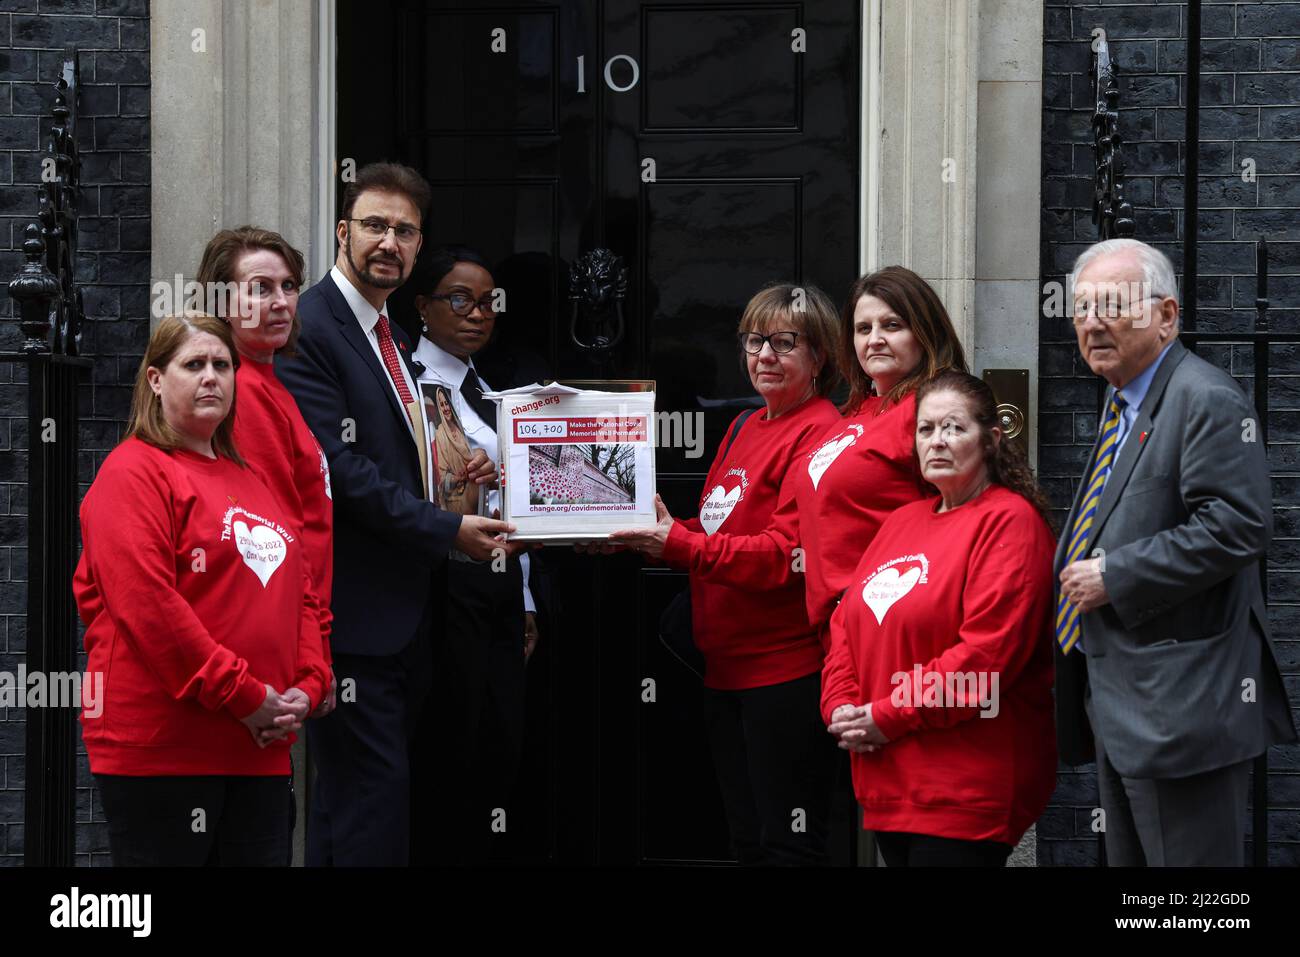 Members of the COVID-19 Bereaved Families for Justice UK stand outside 10 Downing Street on national day of reflection to mark the 1 year anniversary of The National Covid Memorial Wall creation, in London, Britain March 29, 2022. REUTERS/Tom Nicholson Stock Photo